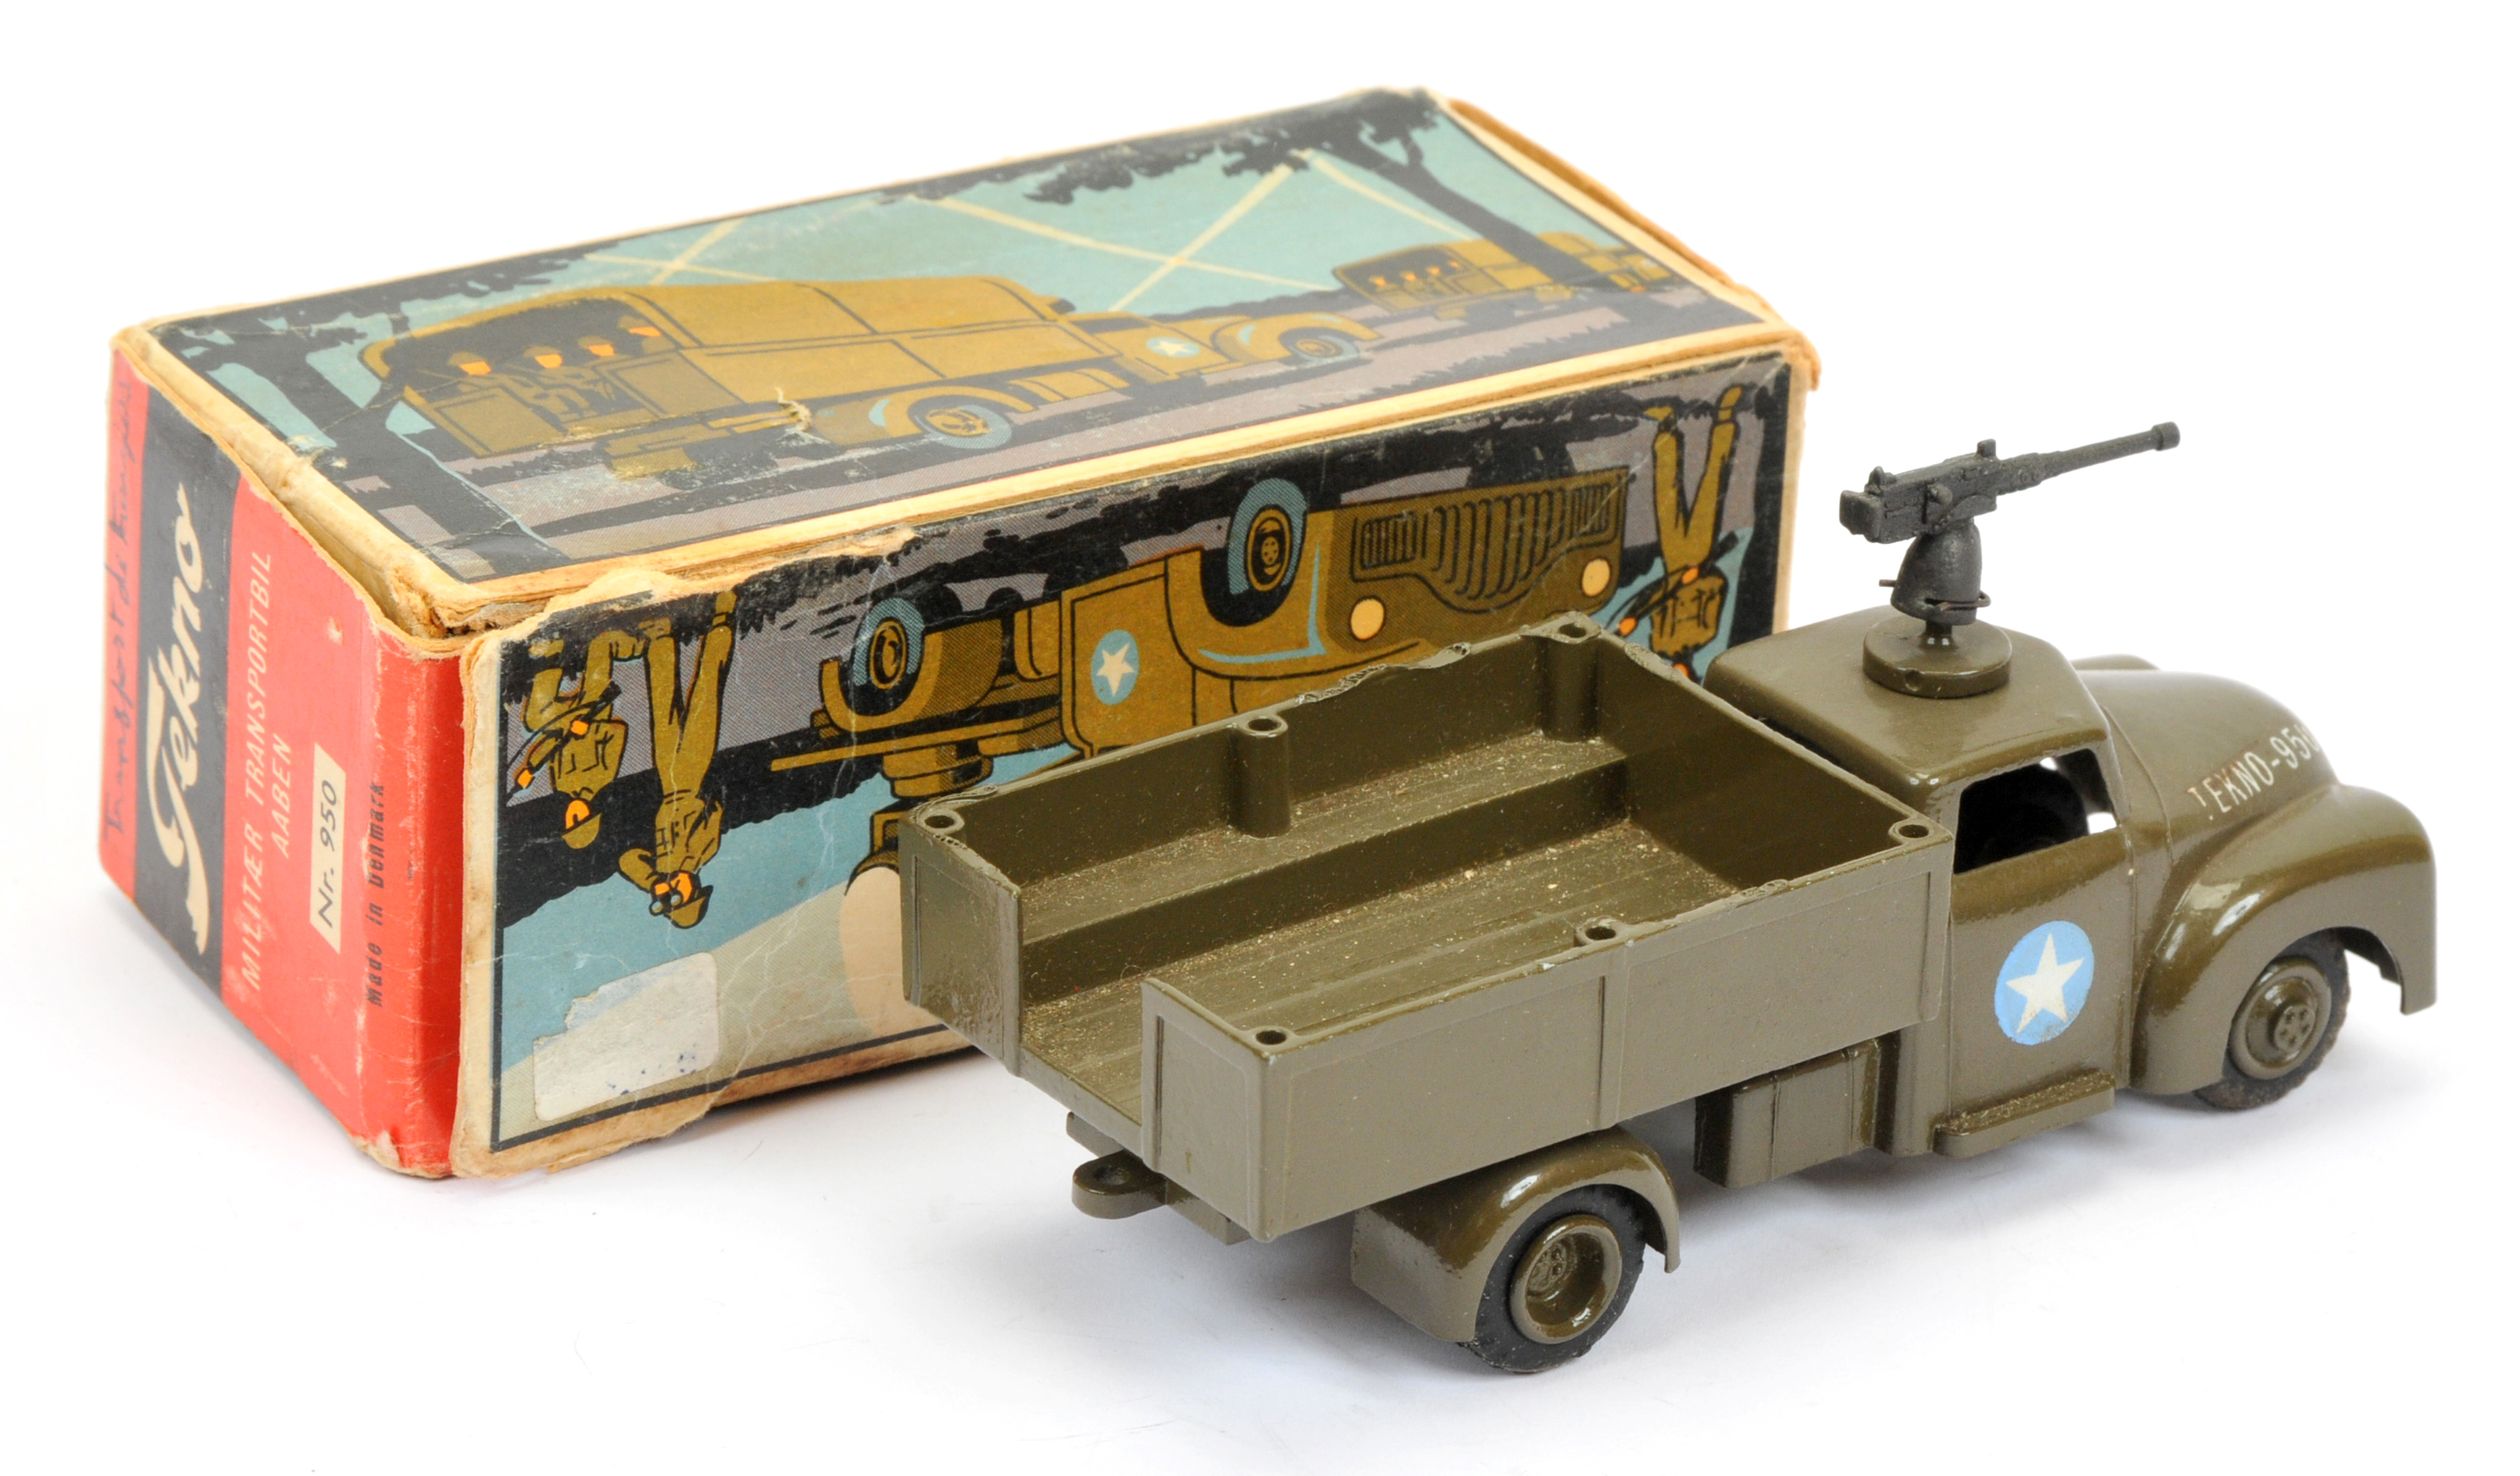 Tekno Military 950 dodge open back lorry - Gloss drab green hubs,  with"TEKNO-950" - Image 2 of 2